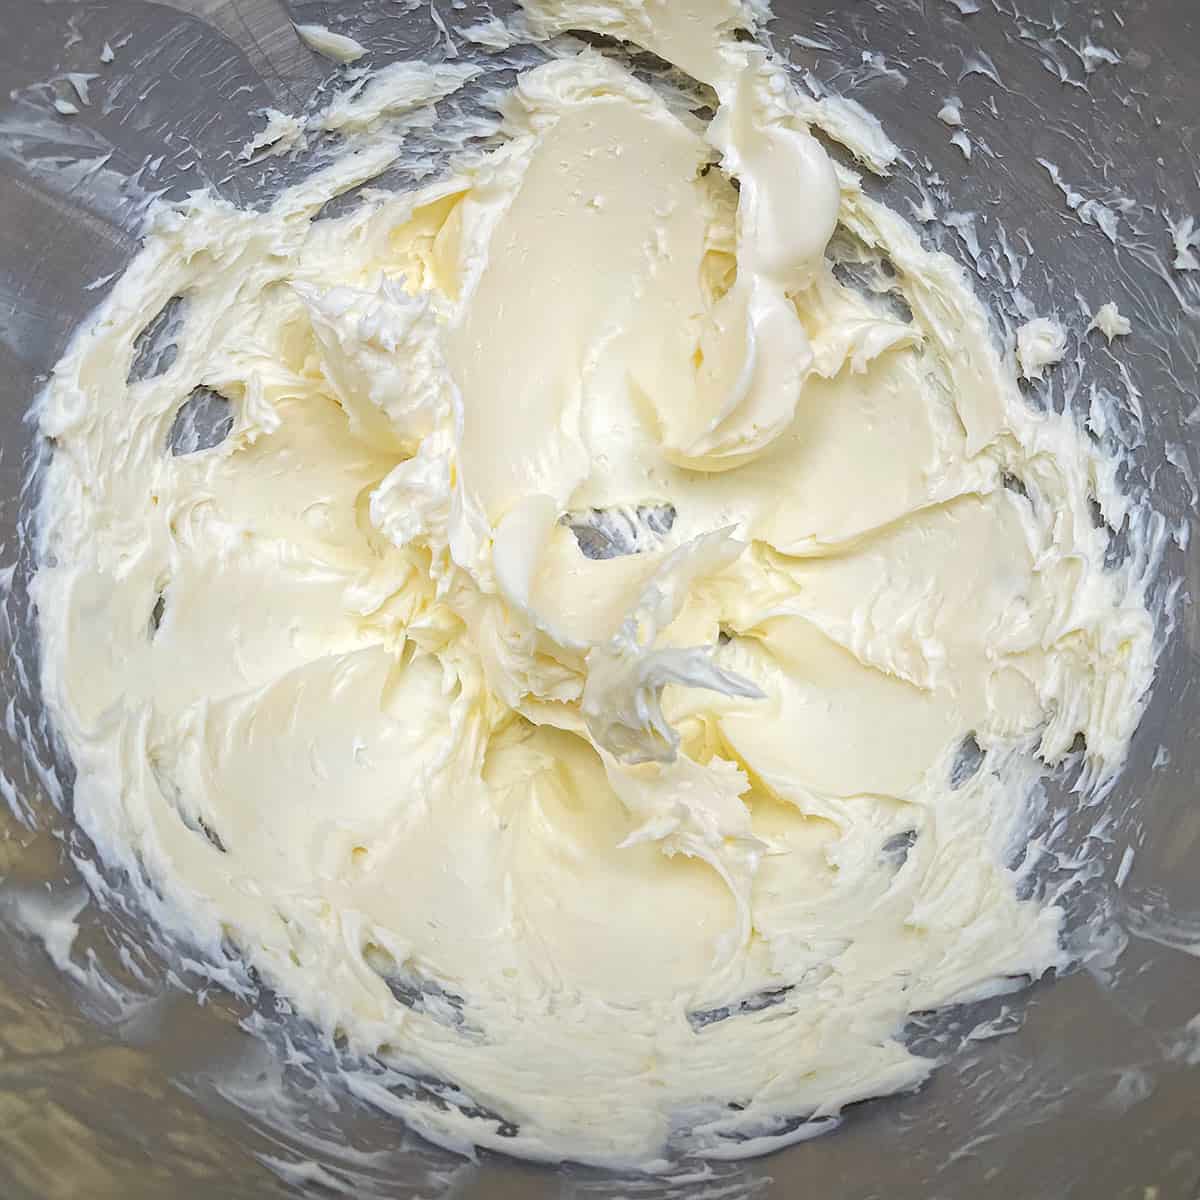 Creamed butter in a mixer bowl.